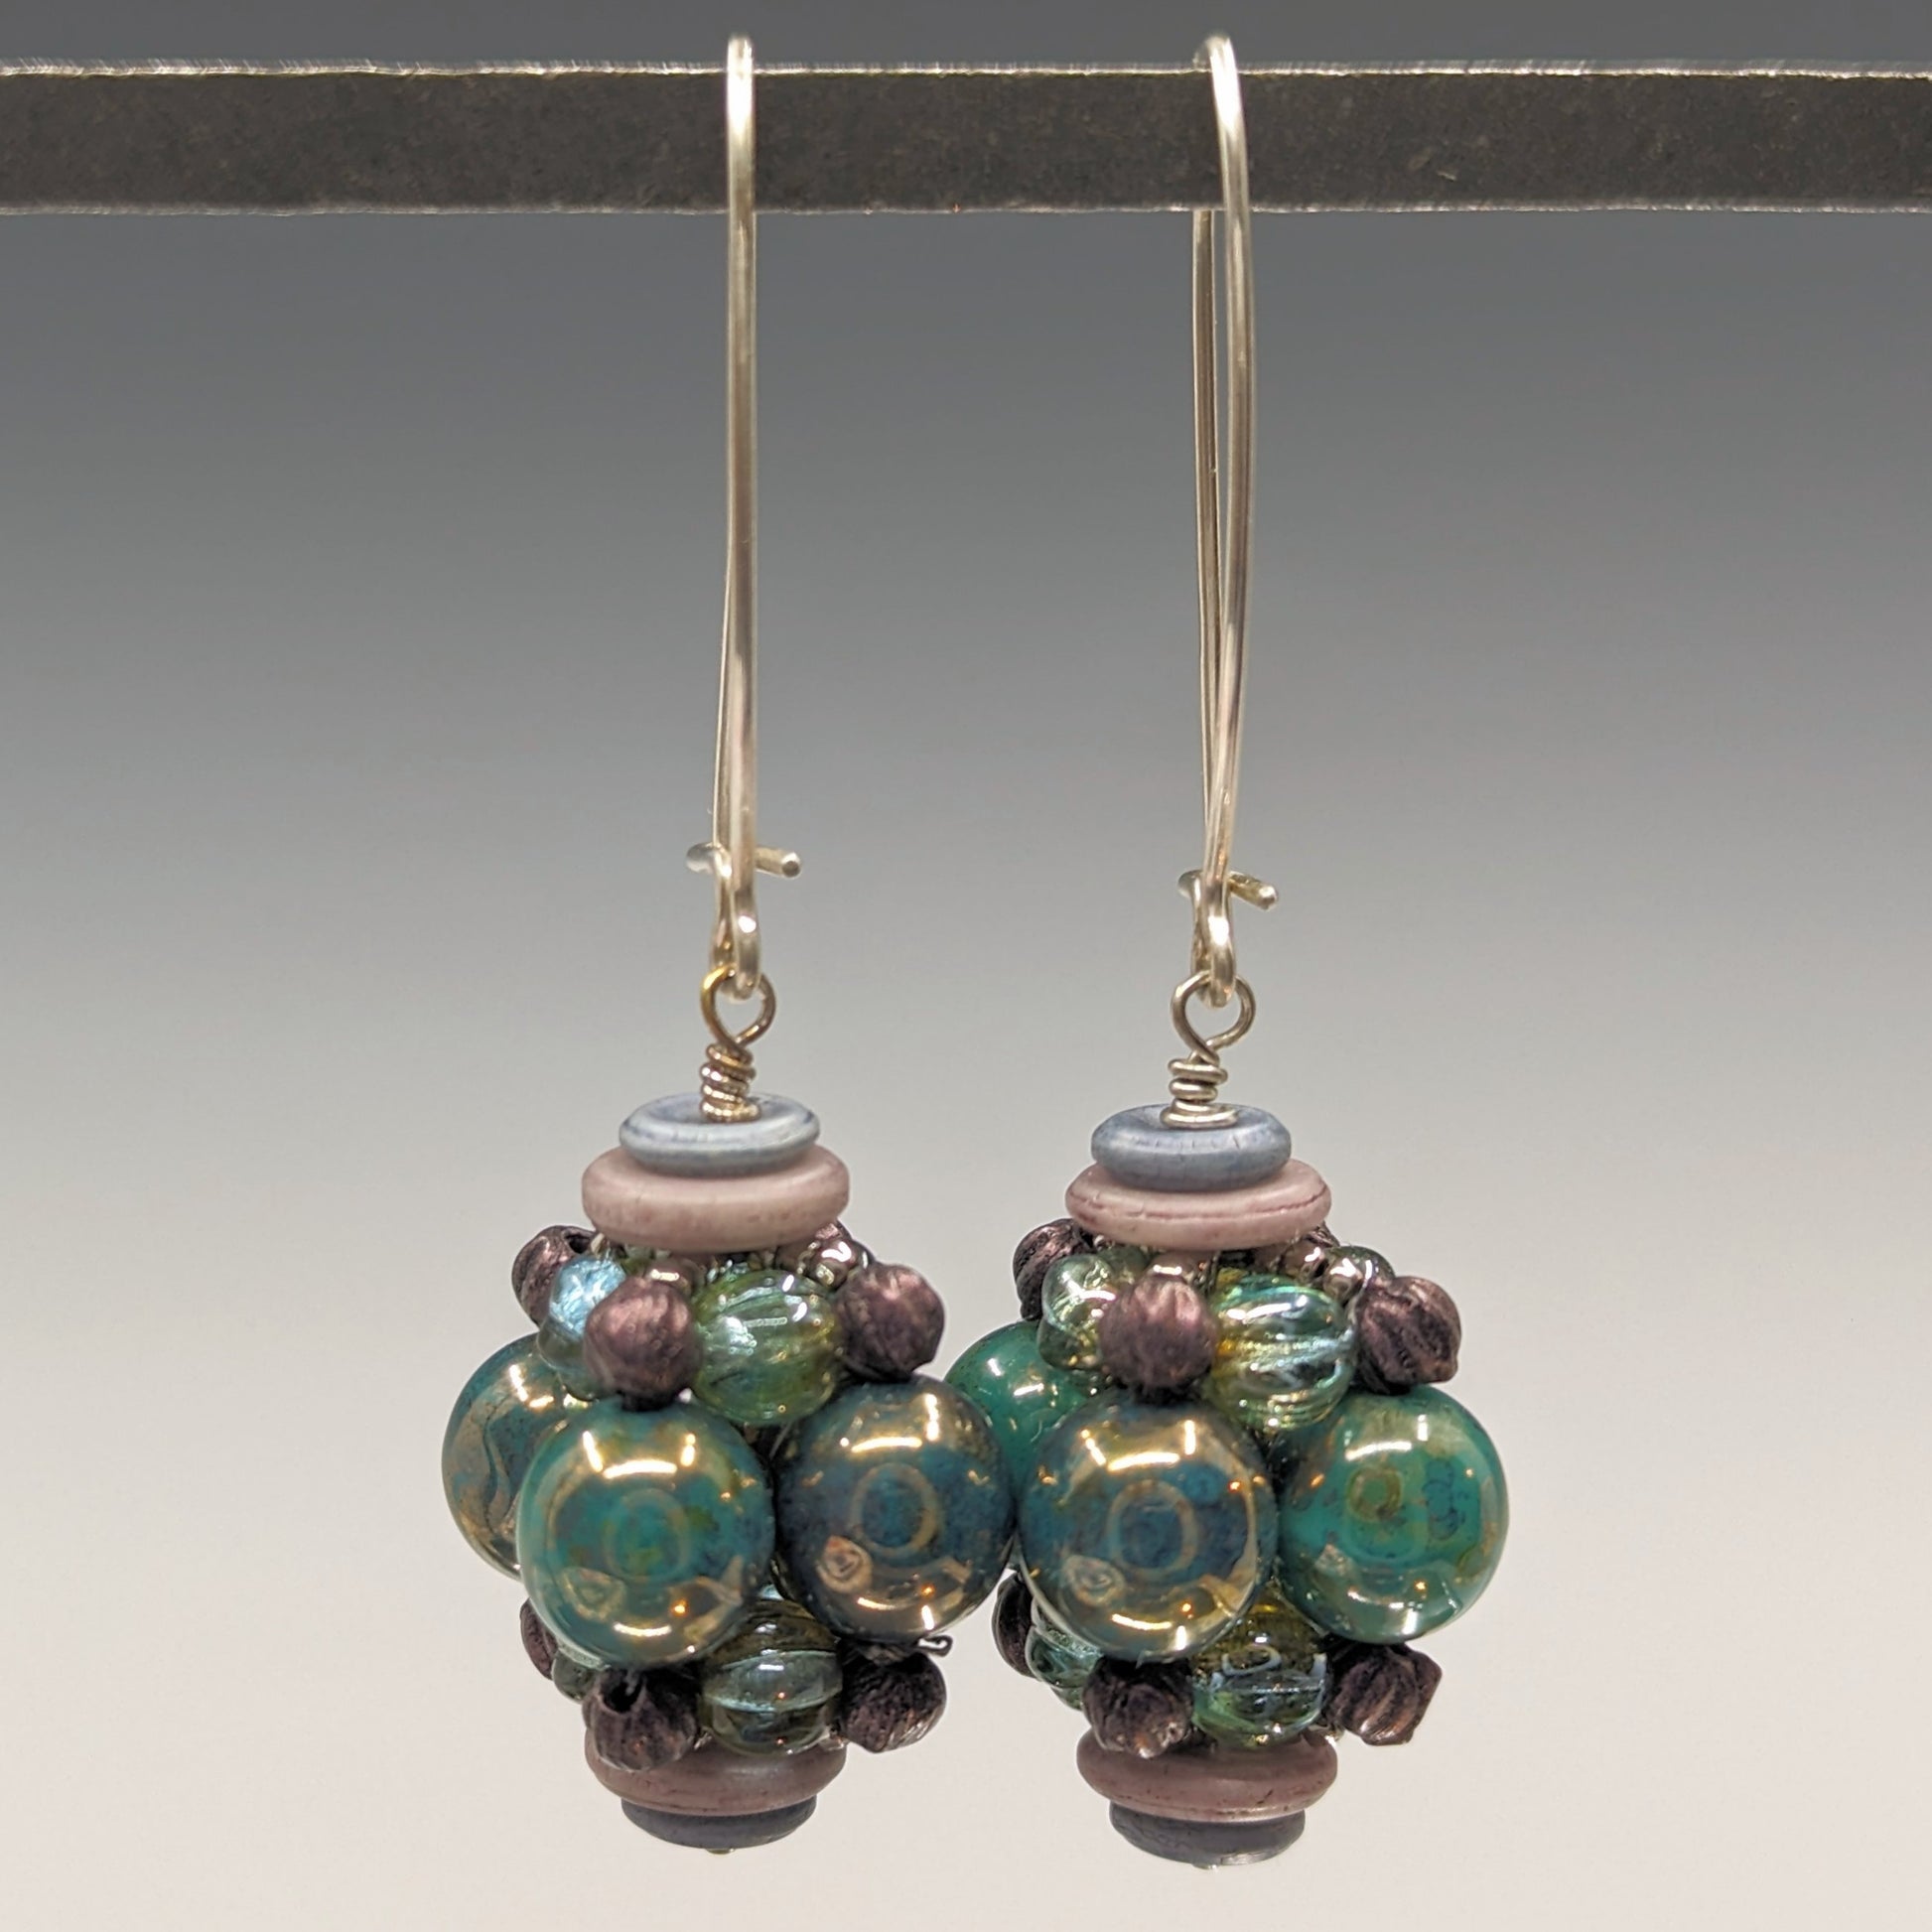 A pair of earrings hang from a black bar against a gray background. The earrings have long silver oval wires that latch and there is a beaded ball dangling from the bottom of each earring. The beaded beads are s made from bluish green beads with a bronze luster, surrounded by layers of silver, sea green, and lillac beads. 